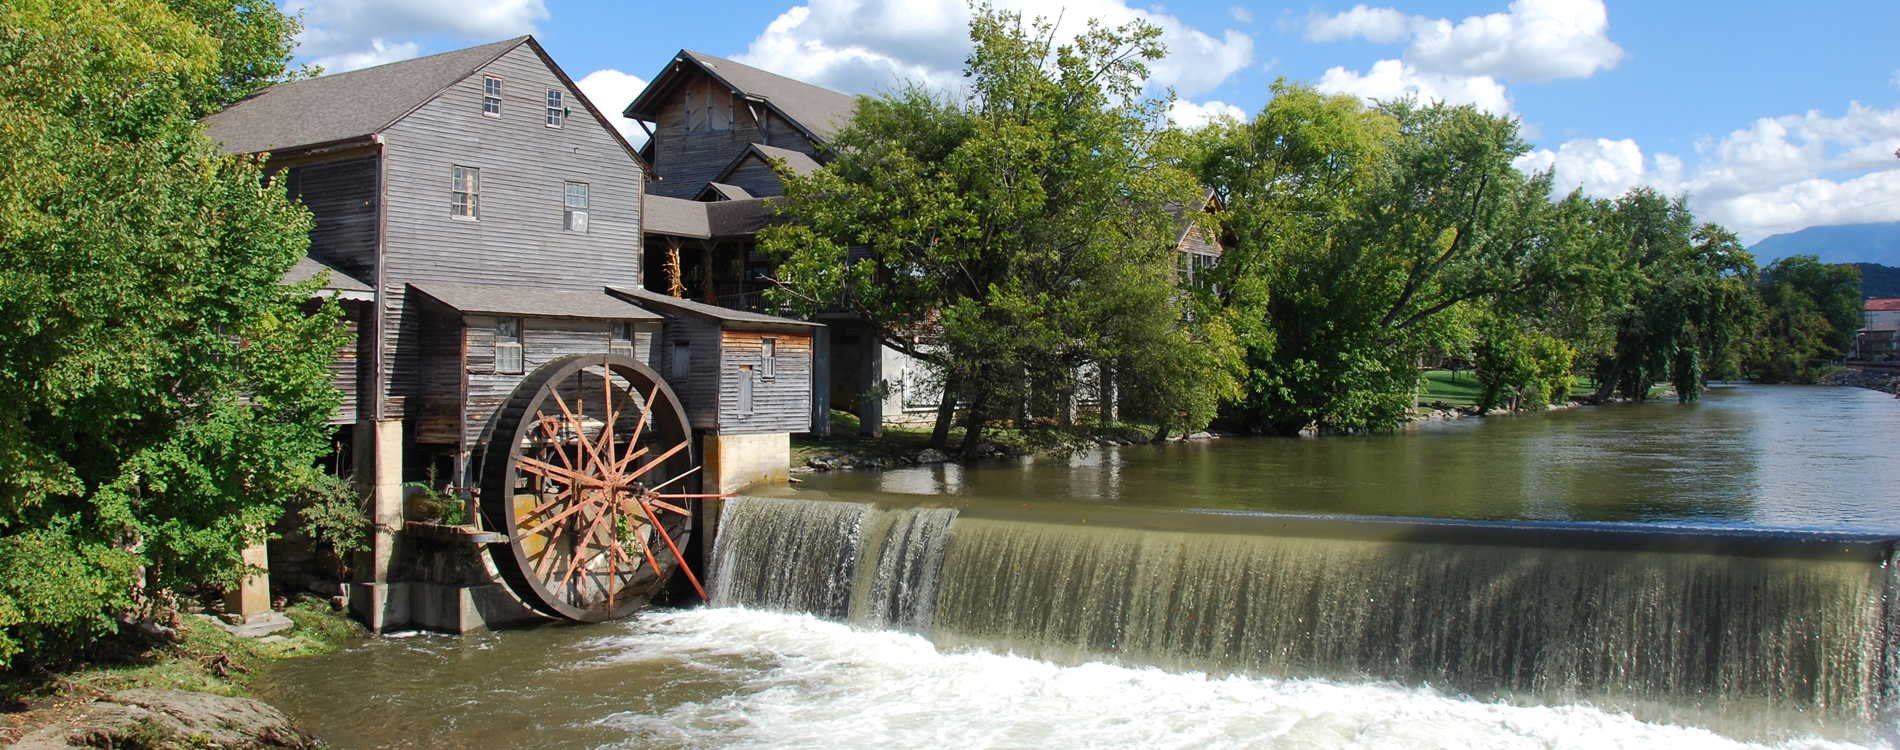 Pigeon Forge, TN - Old Mill and Waterfall